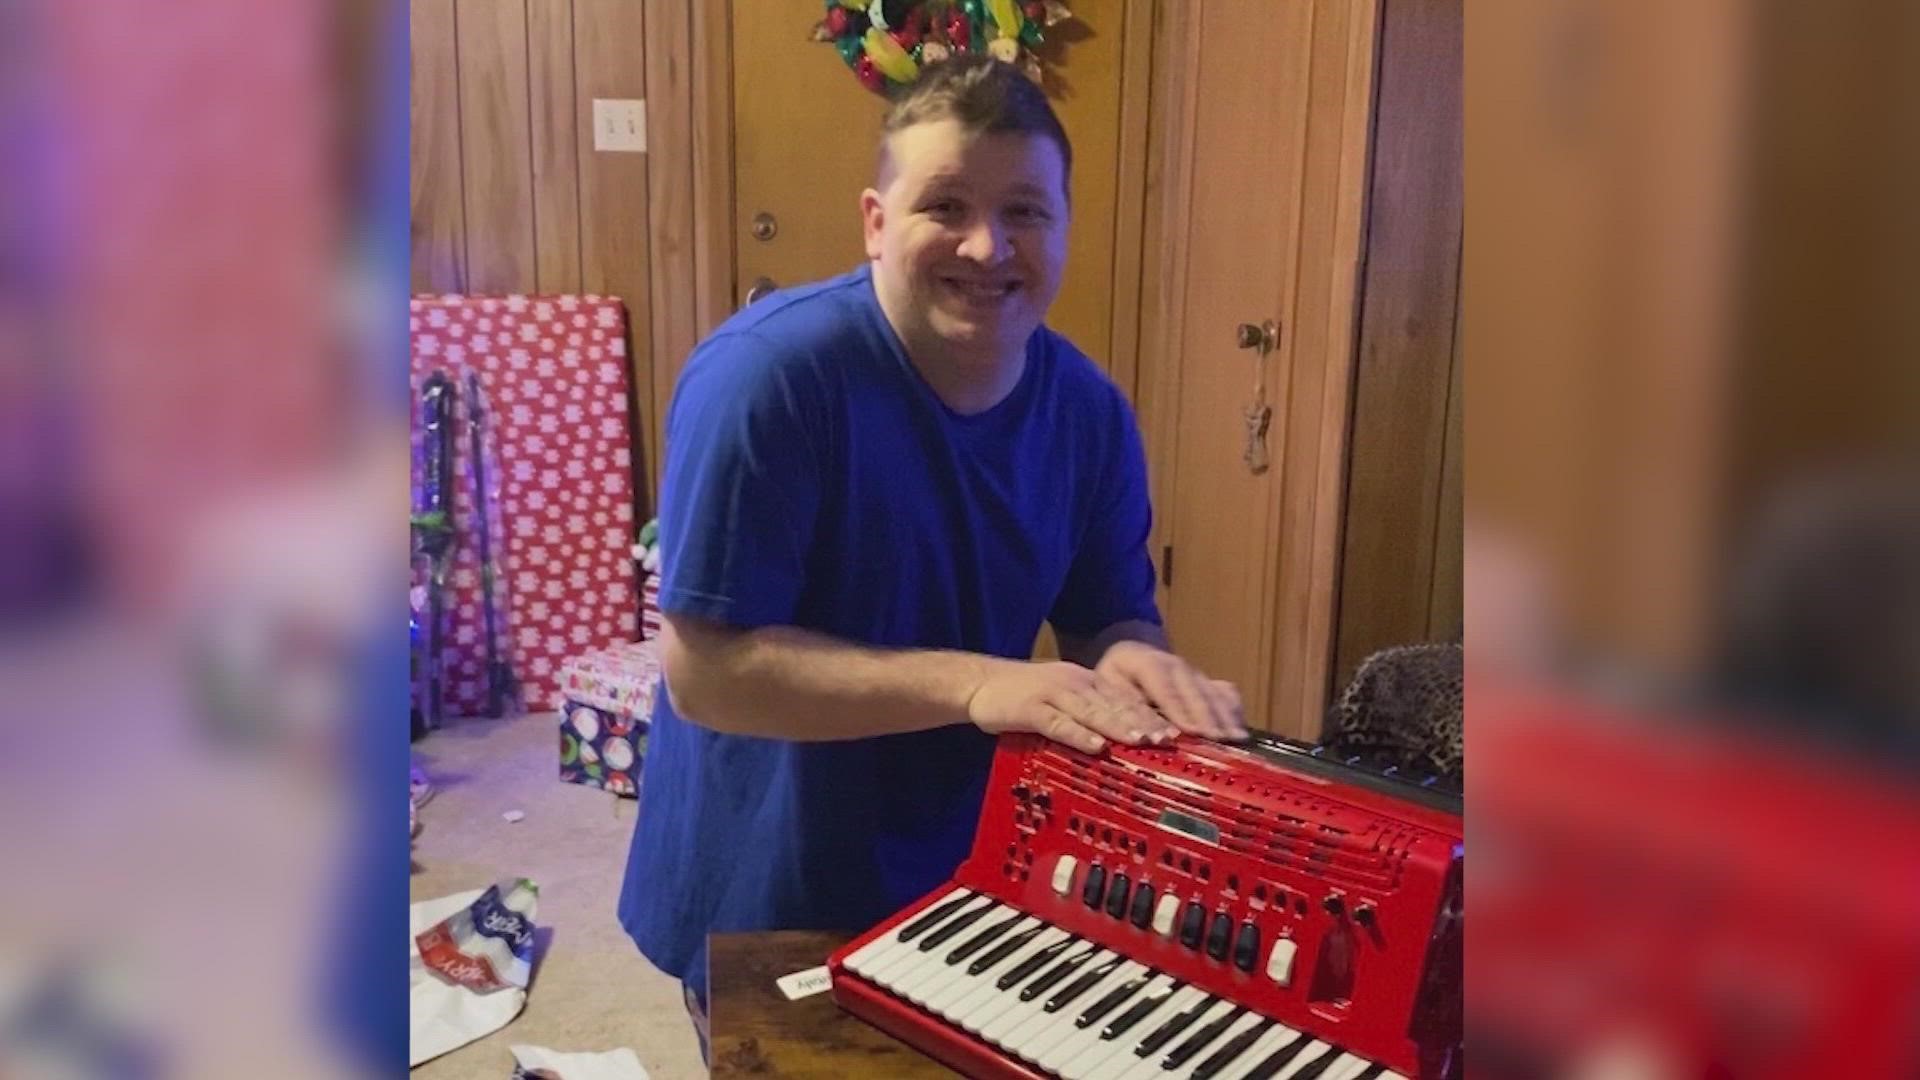 Zack Novak hasn't let autism stop him from performing. His instrument was getting old, so the community surprised him with a new one.